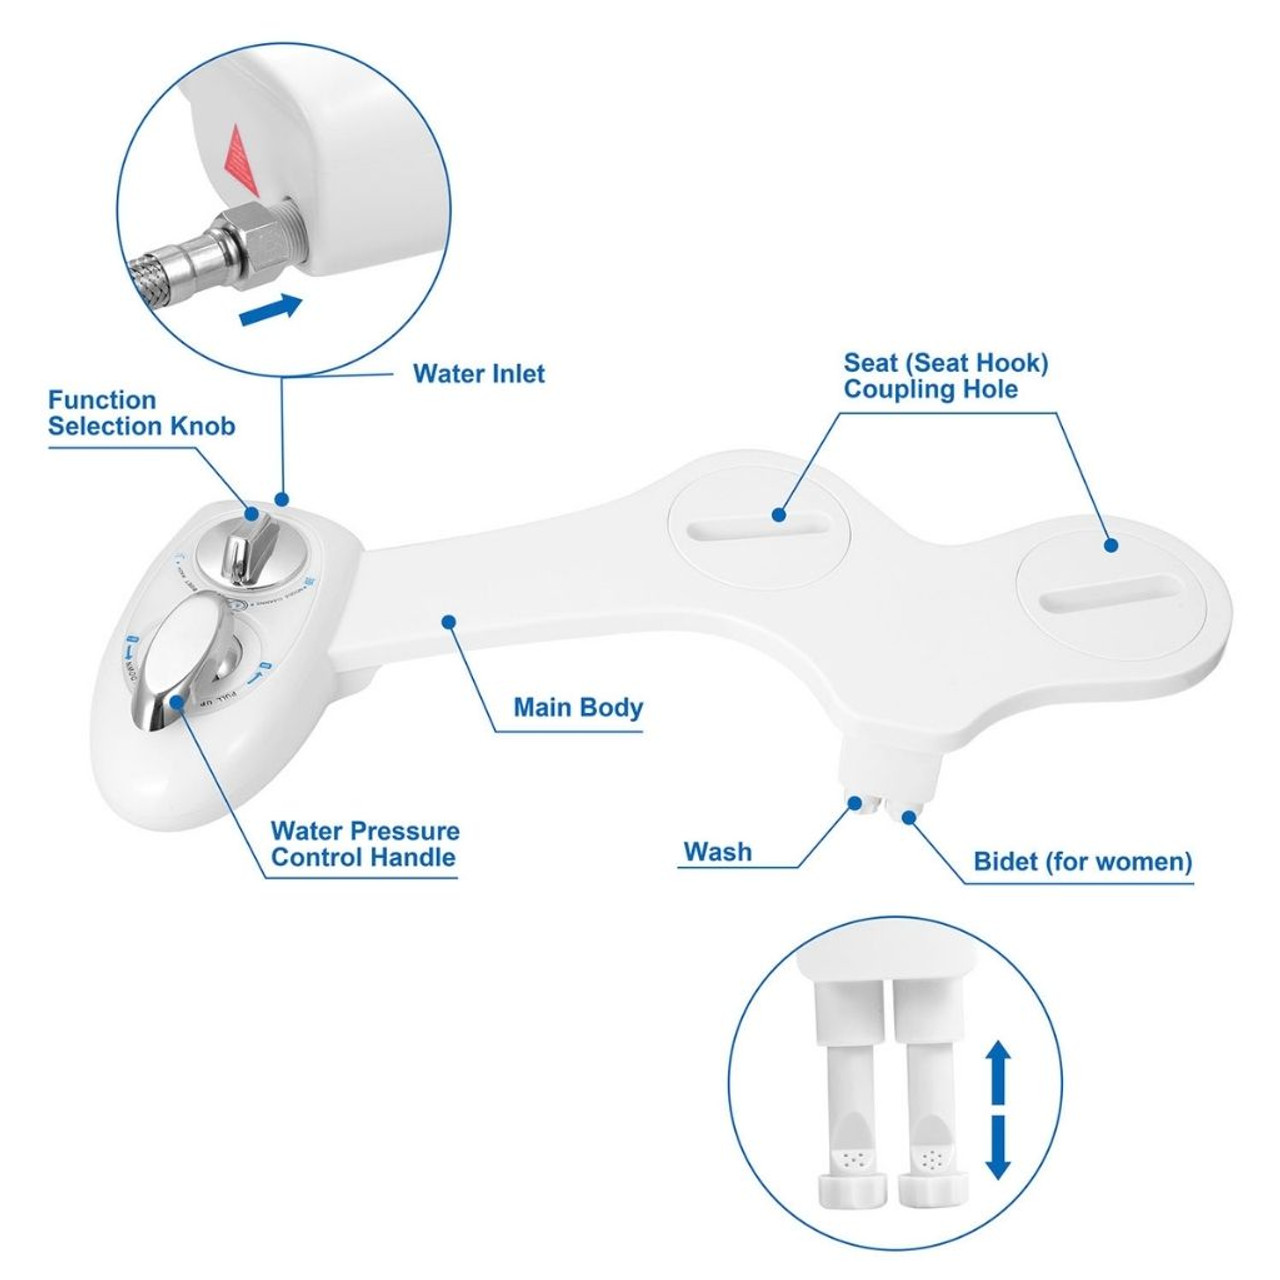 Easy-Install Bidet with Self-Cleaning Dual Nozzle product image